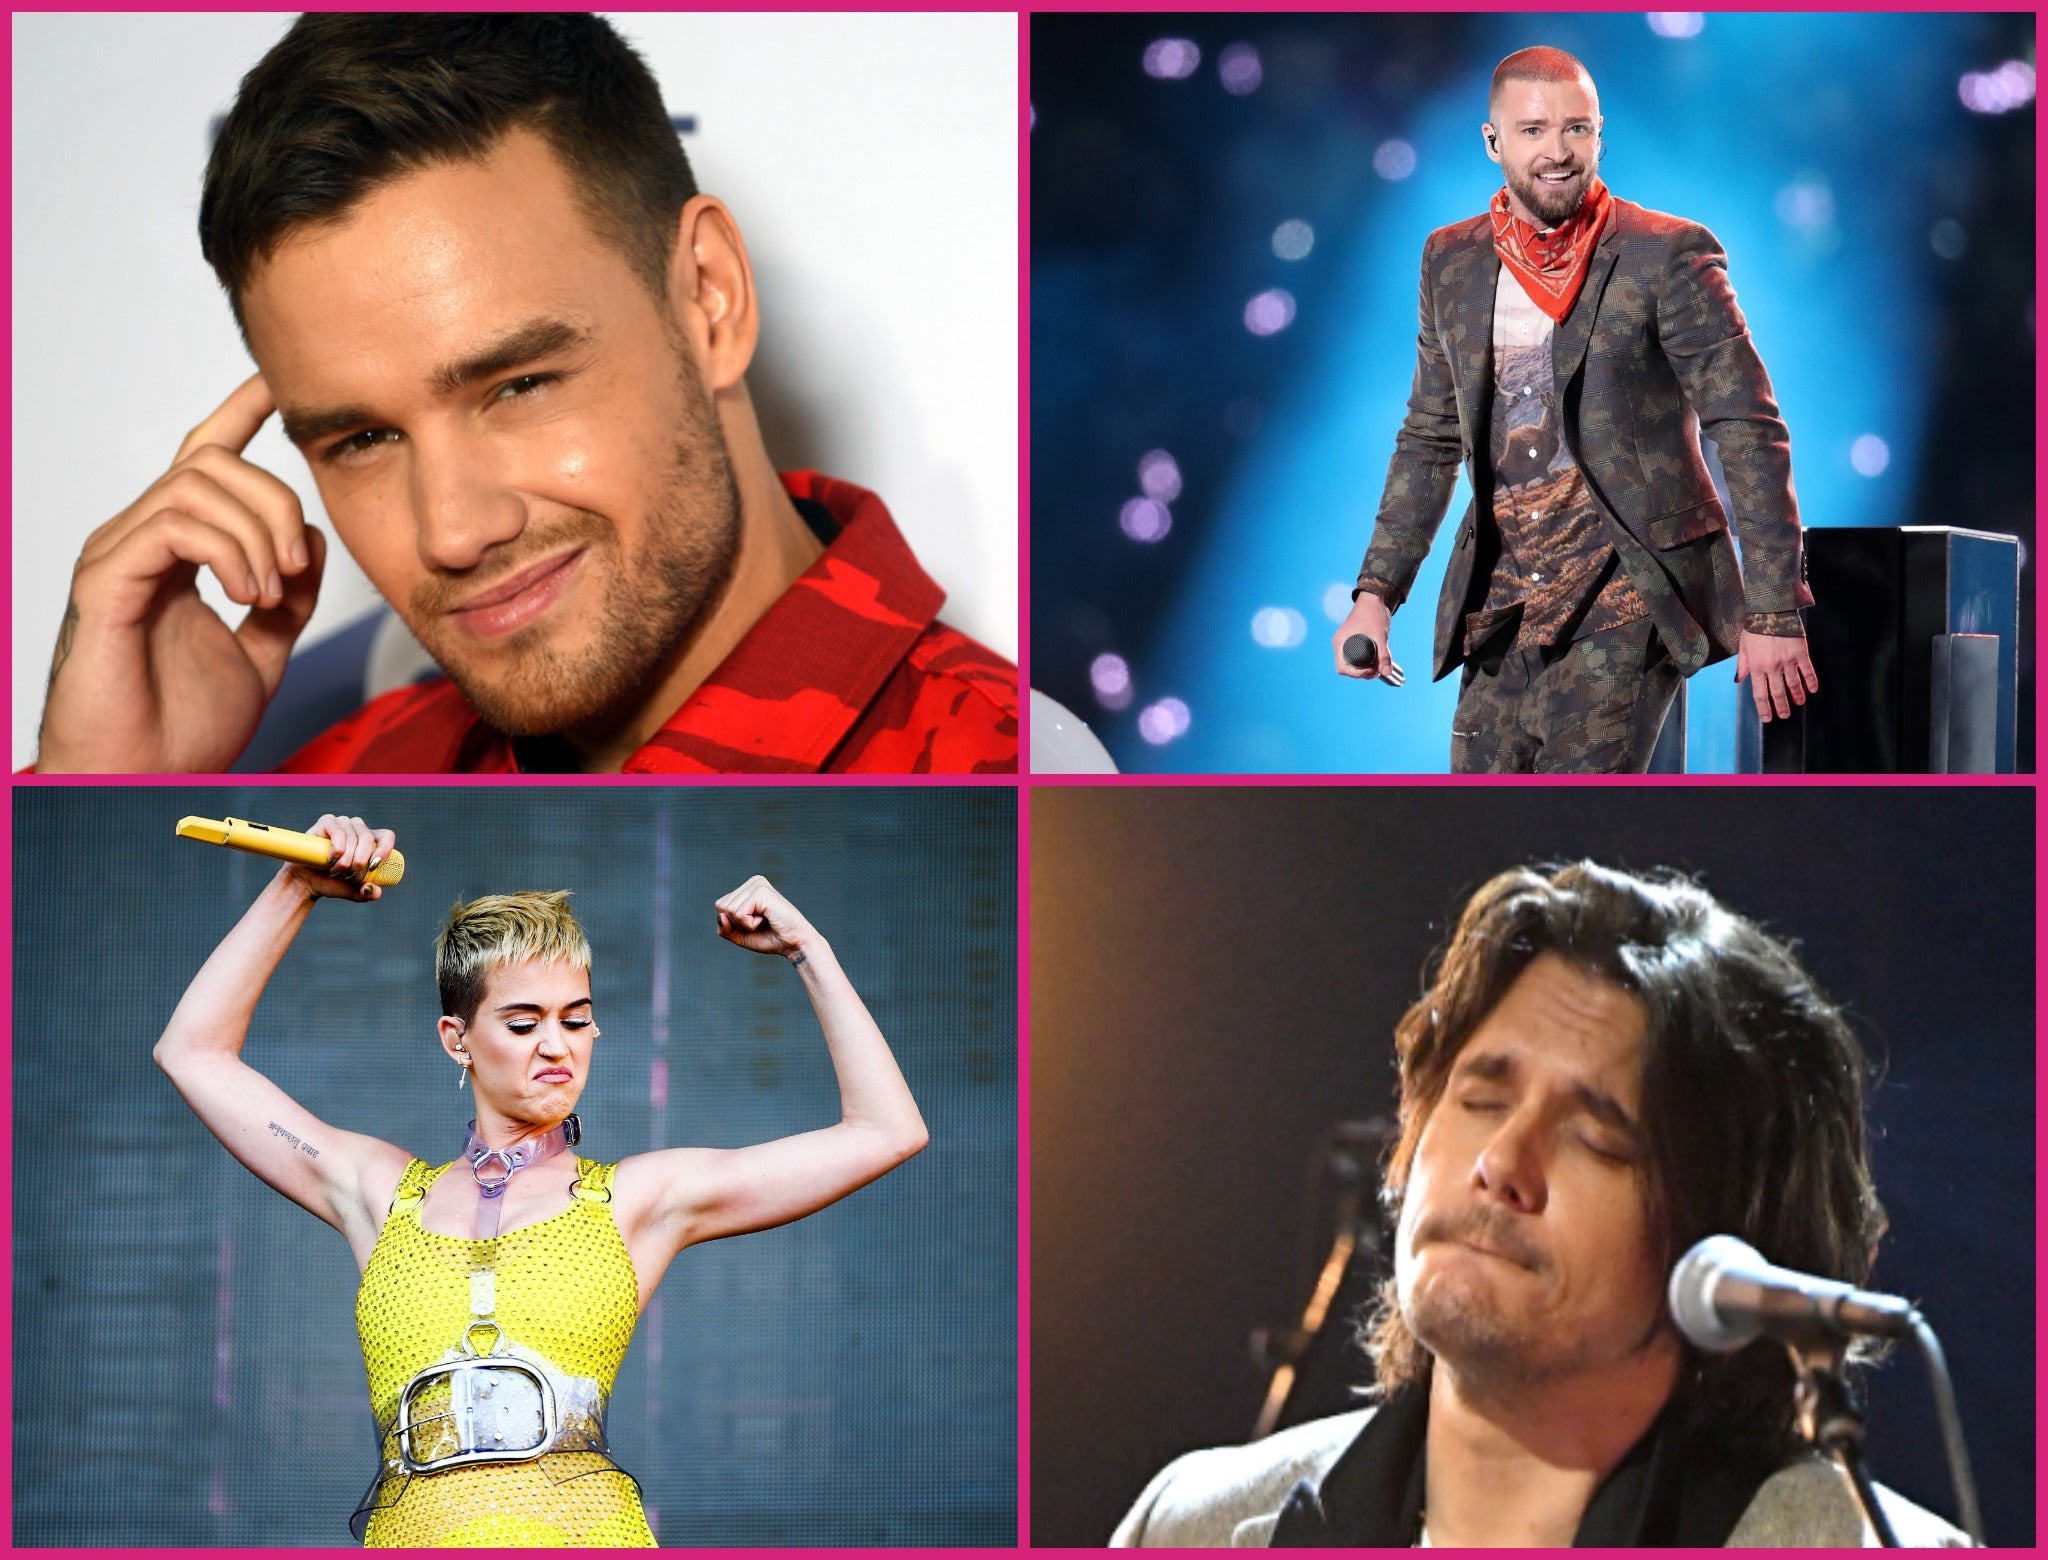 Don’t talk about sex, baby: Top left clockwise, Liam Payne, Justin Timberlake, John Mayer and Katy Perry